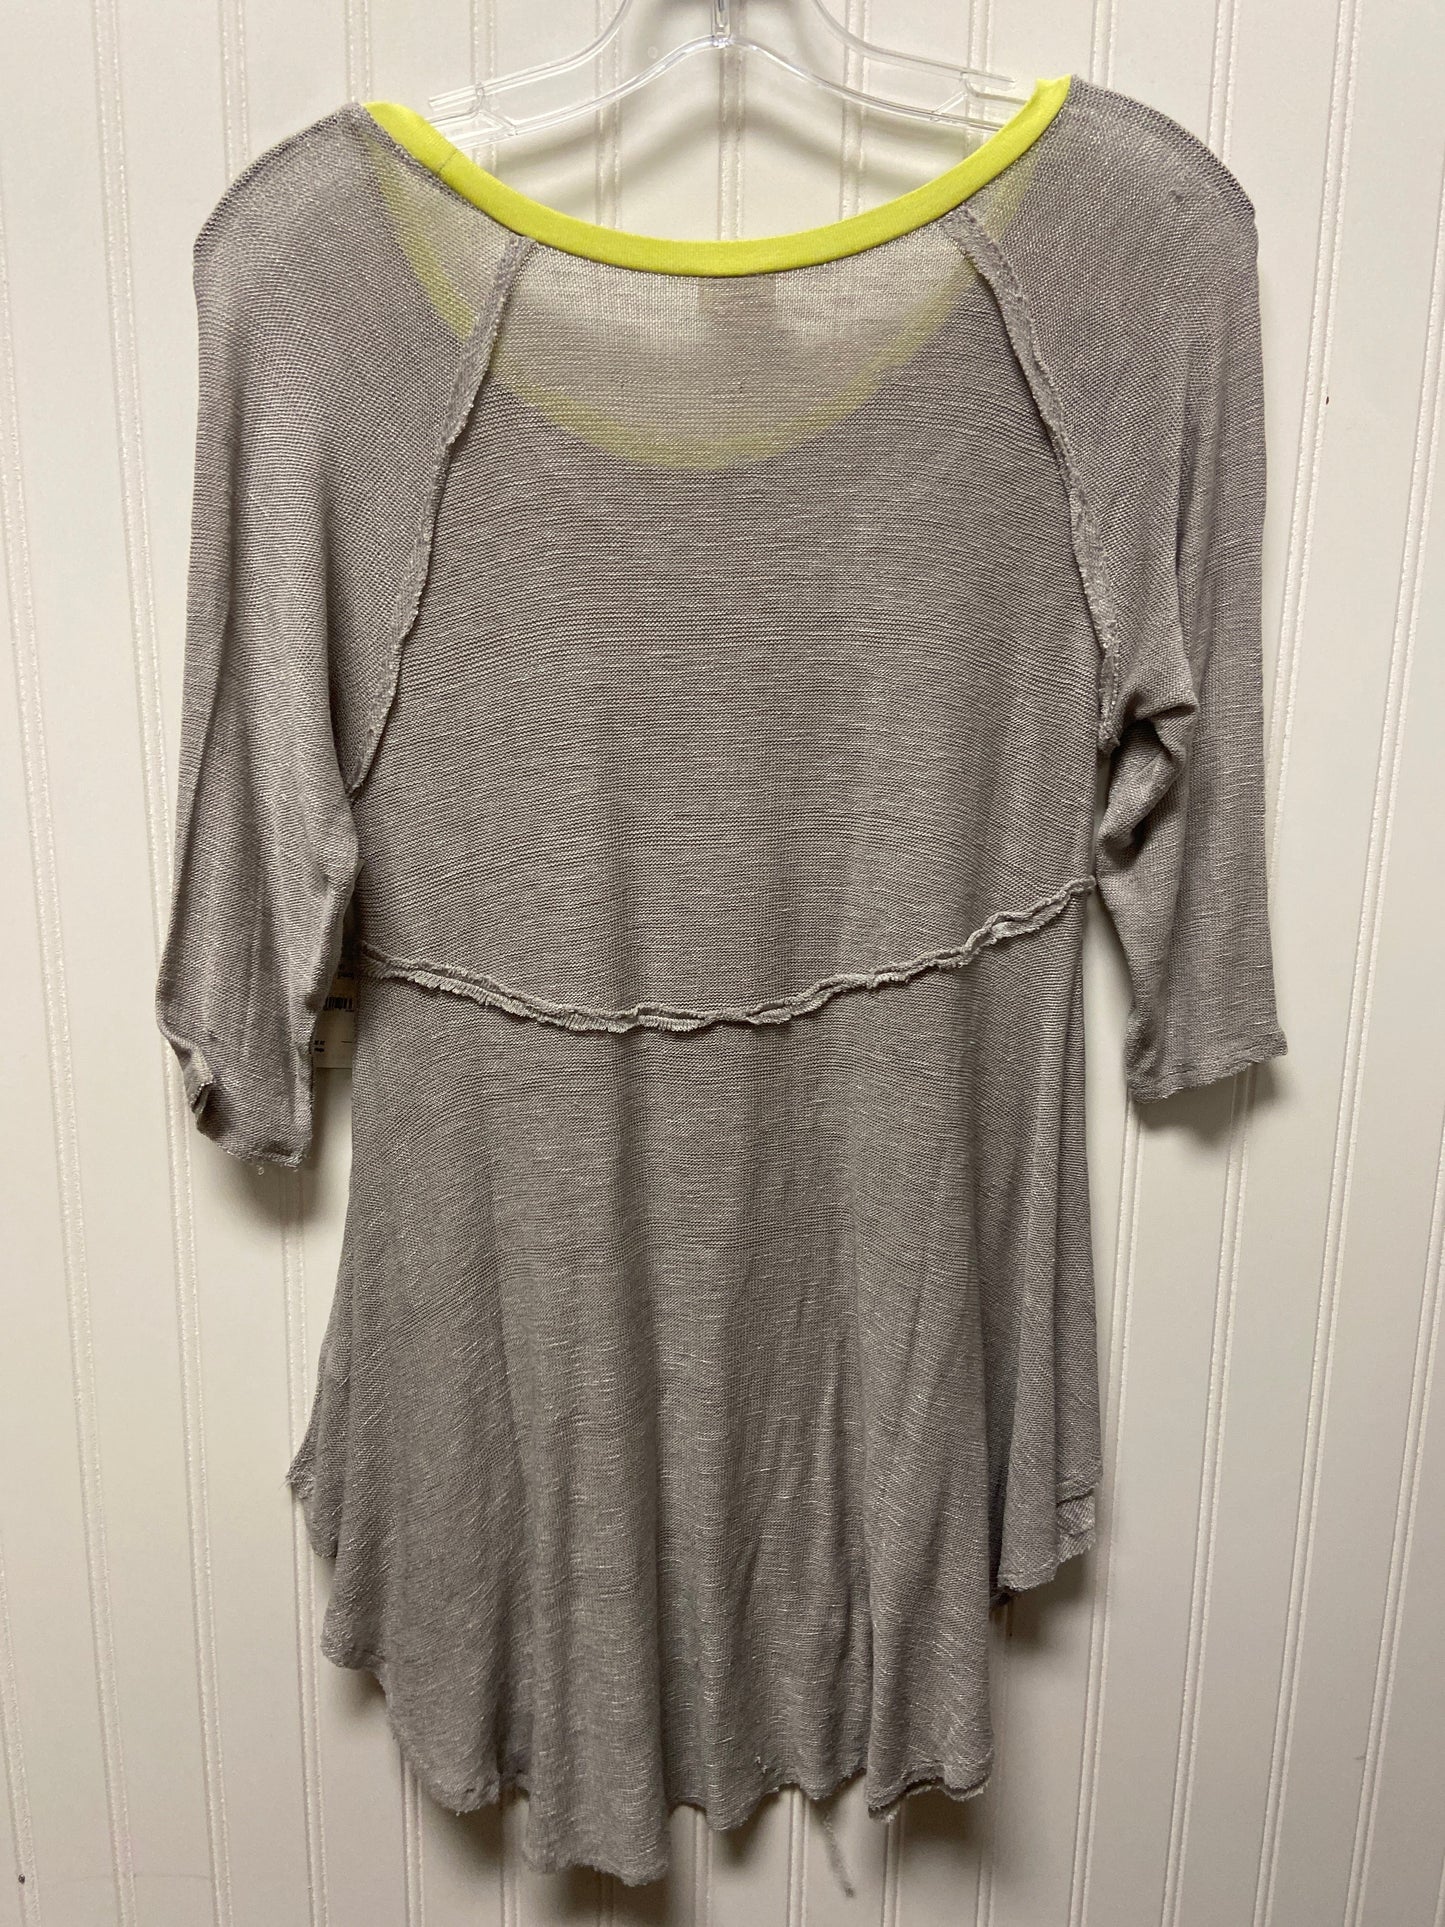 Grey Top 3/4 Sleeve Free People, Size S